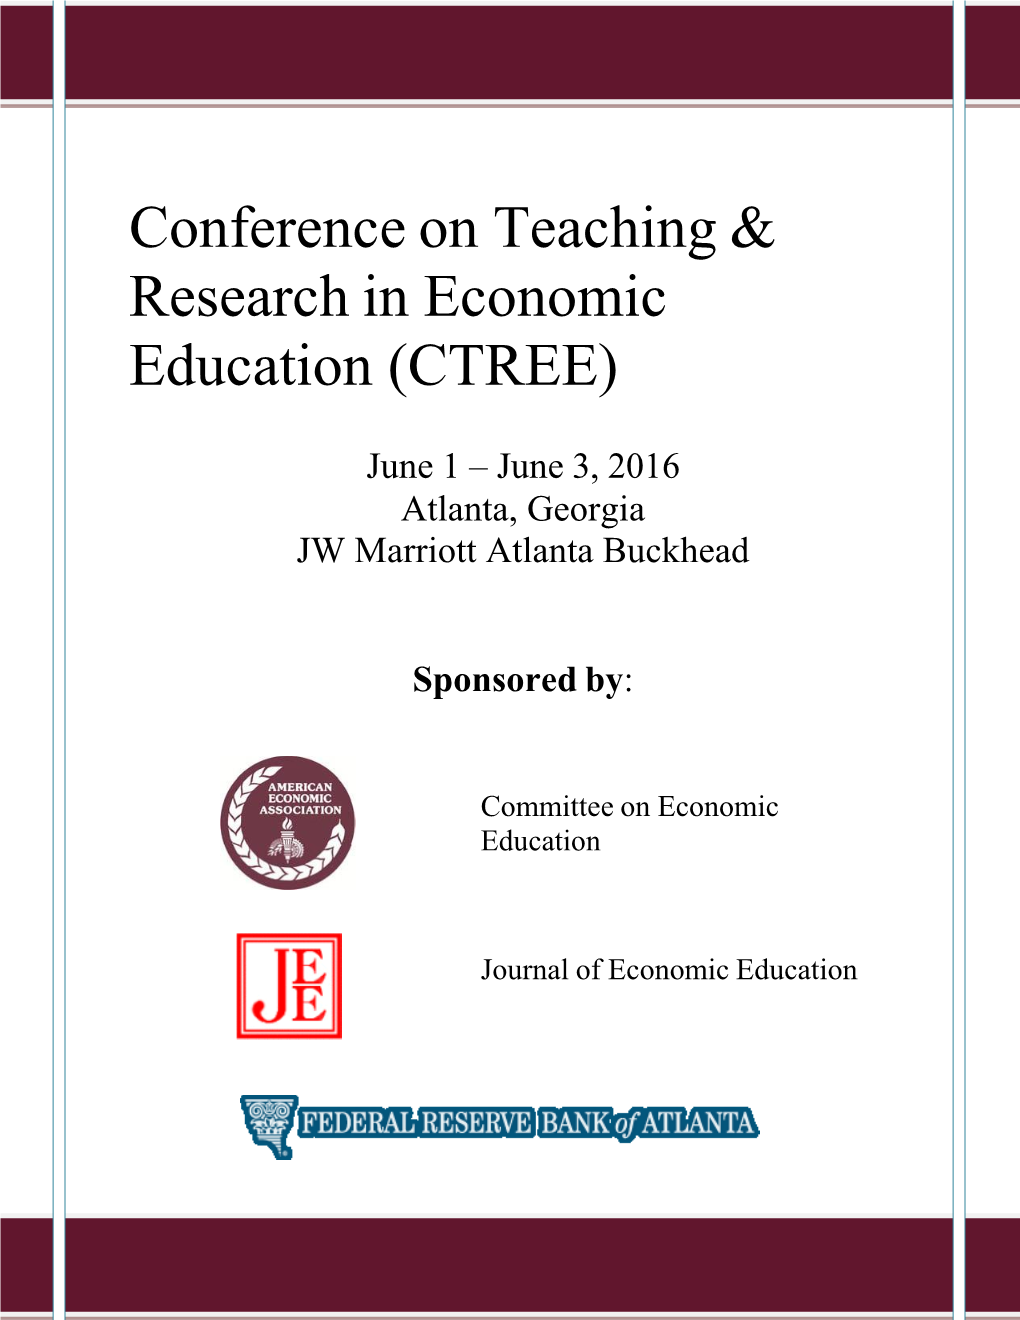 Conference on Teaching & Research in Economic Education (CTREE)